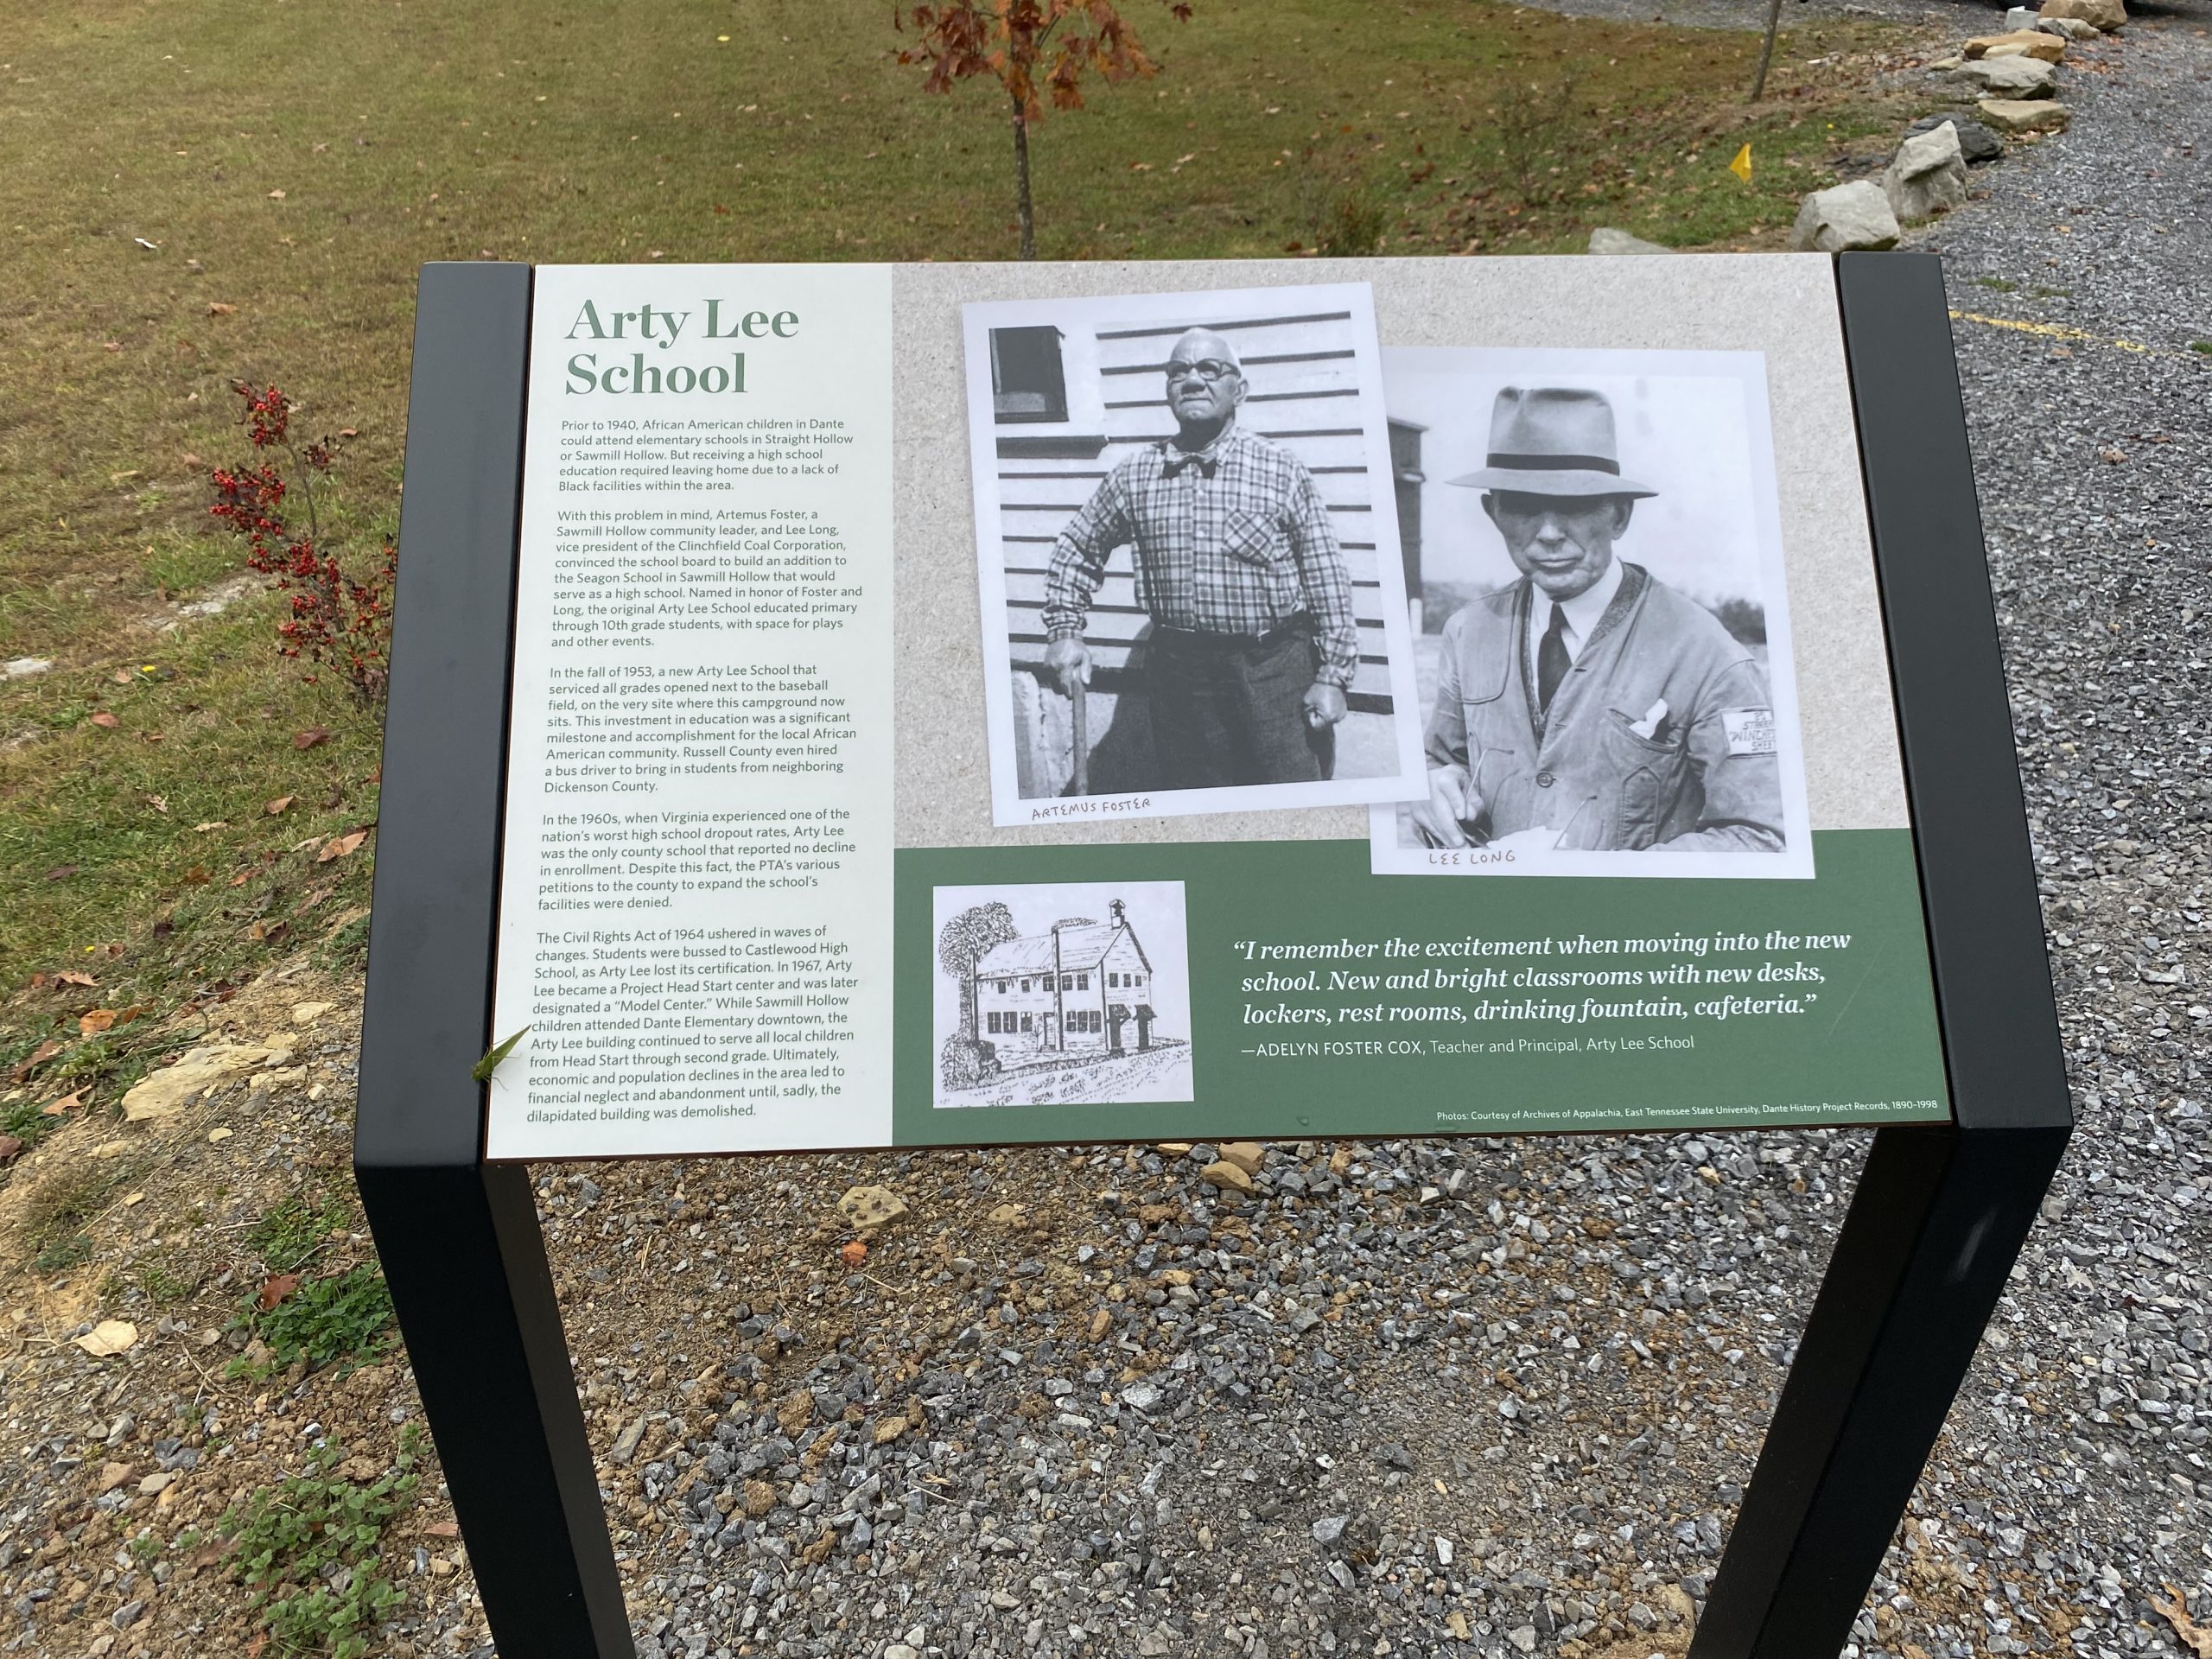 A historic marker displaying information about the Arty Lee School.